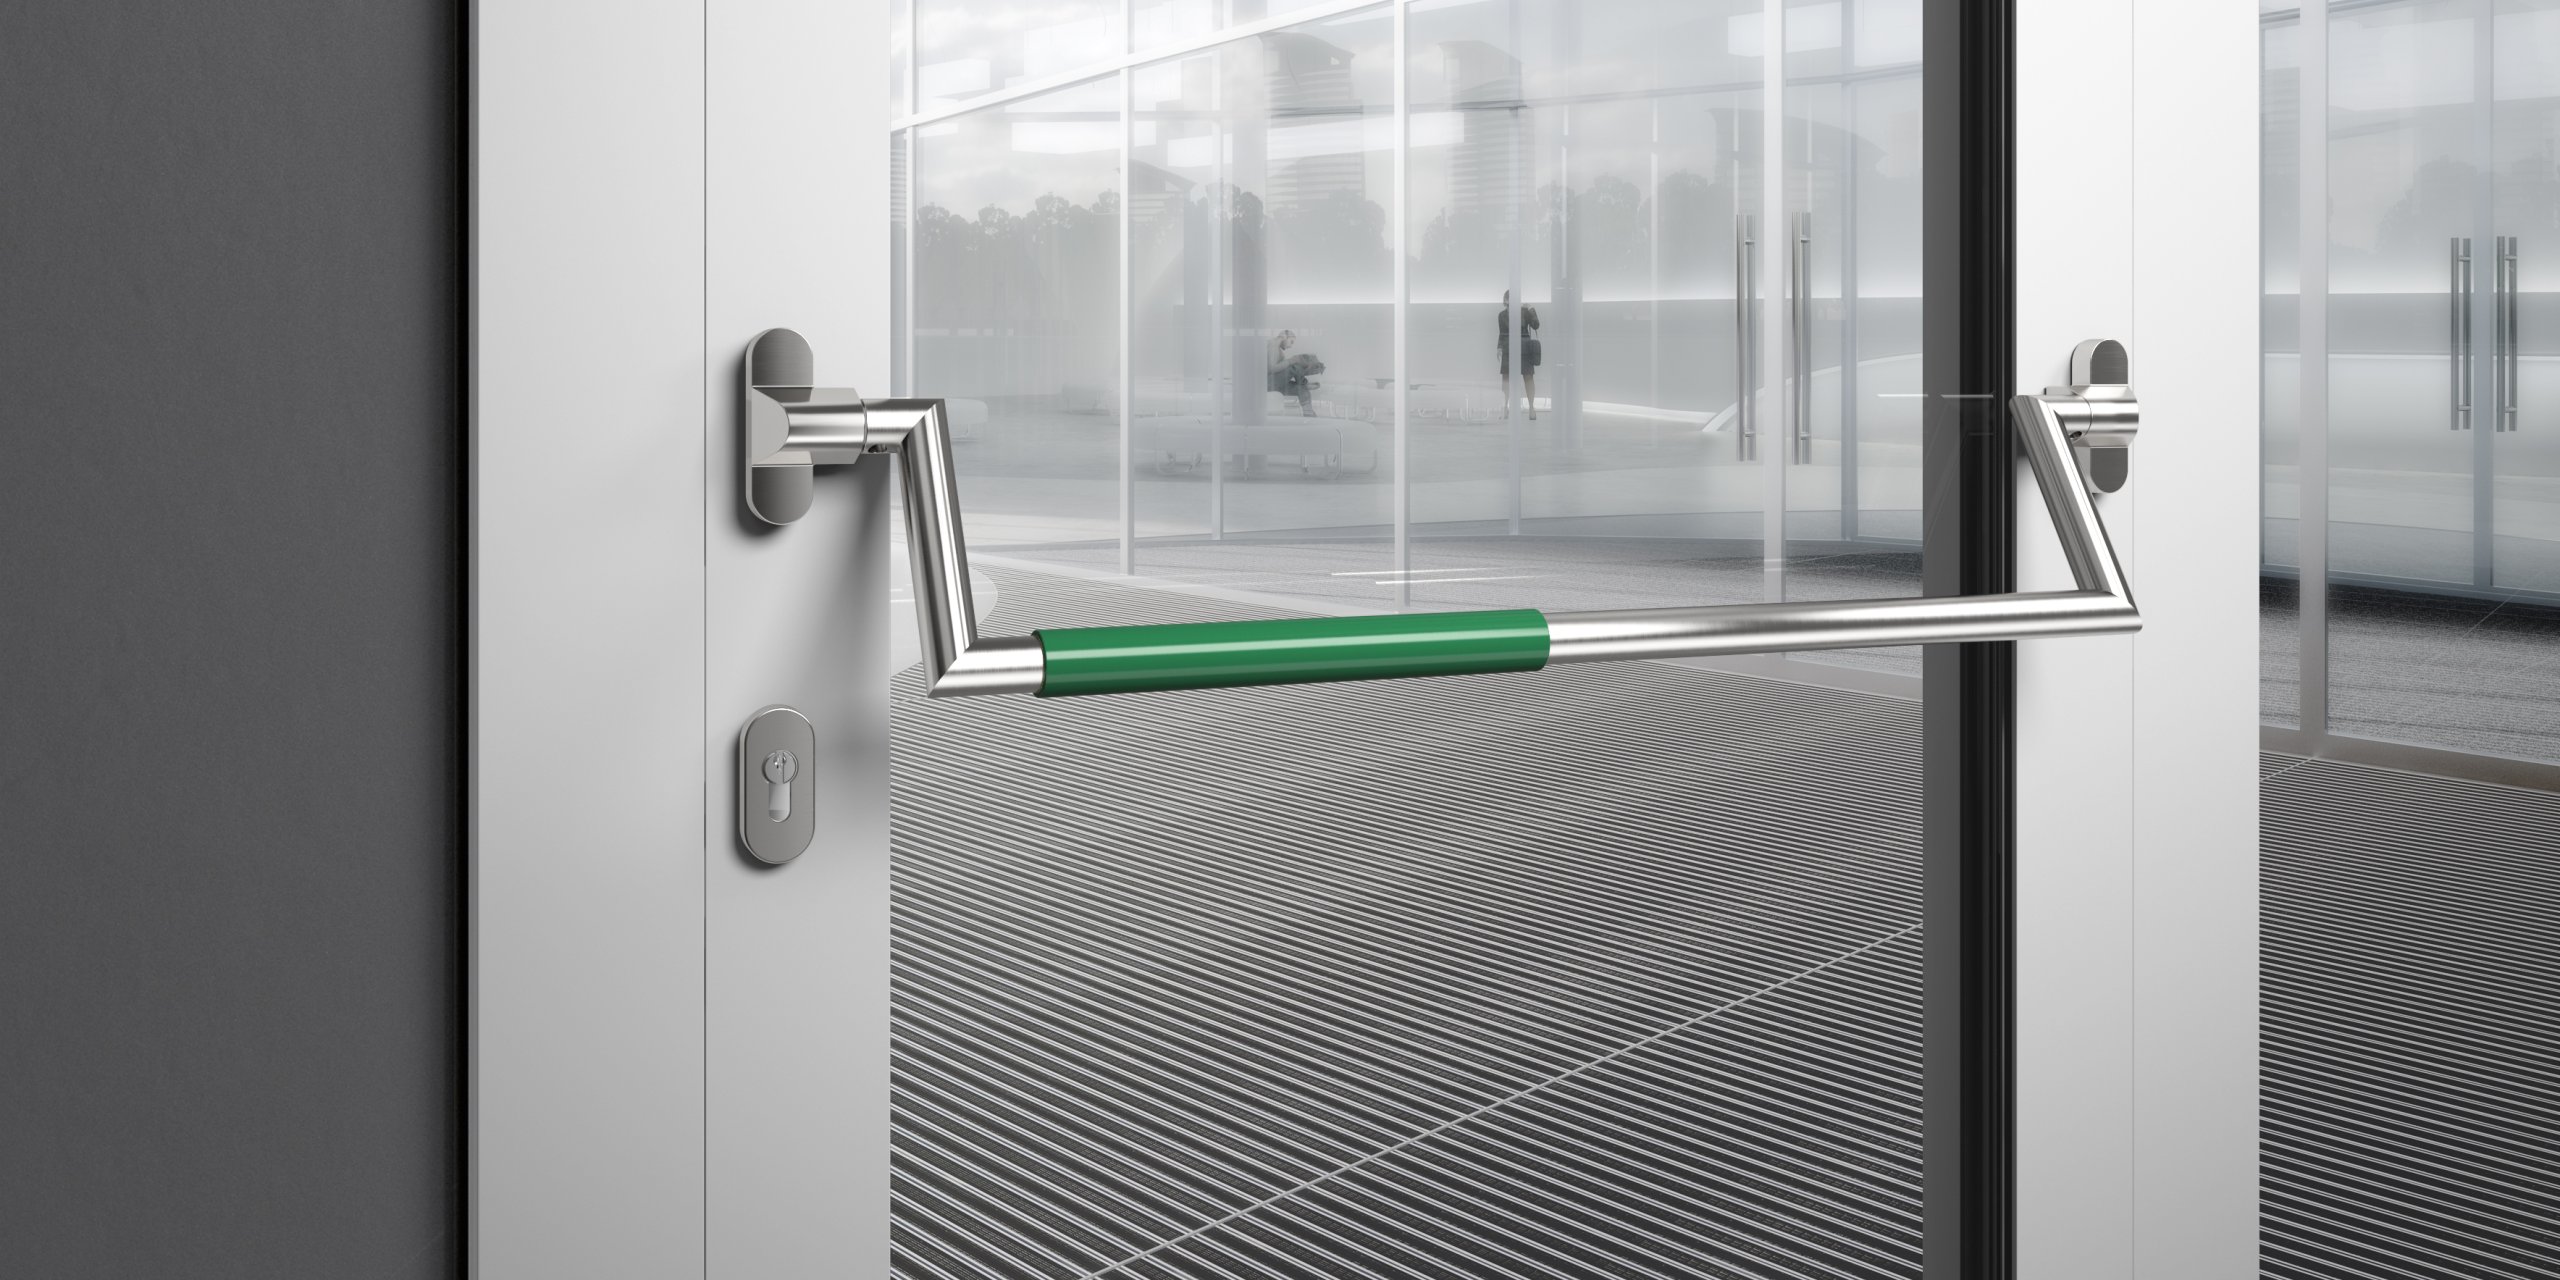 Panic bar on a public building door made of matt polished stainless steel with green polyamide handle tube